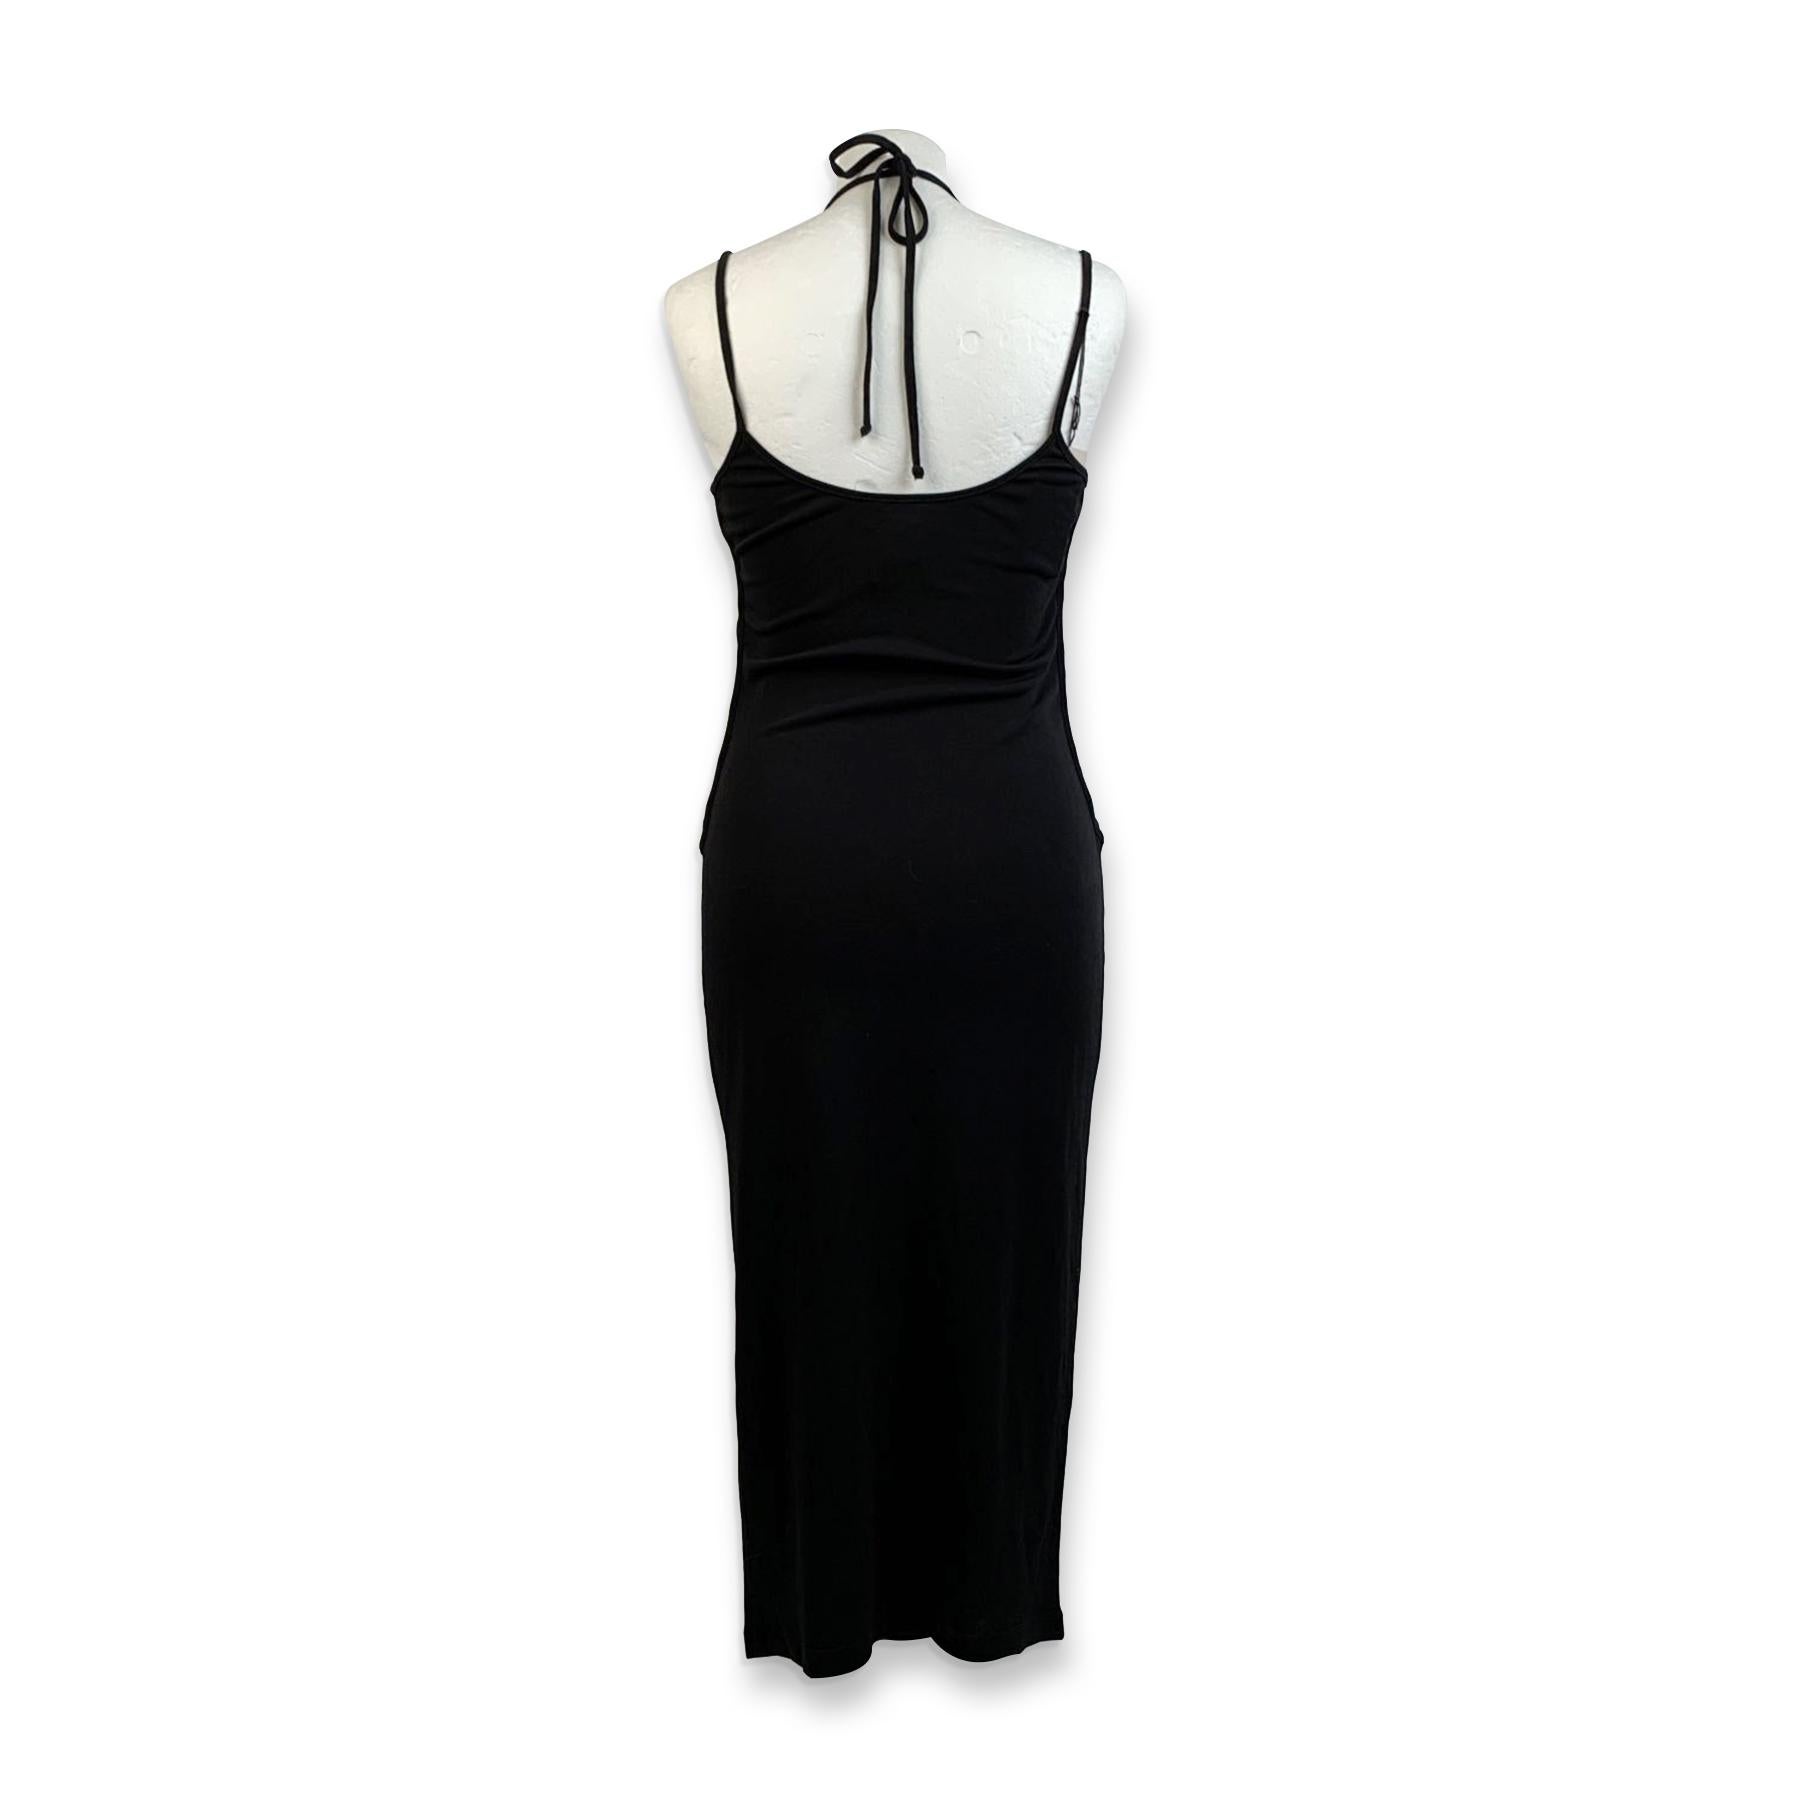 D&G Dolce & Gabbana Black Bodycon Dress with Crisscross Detail Size 44 In Excellent Condition In Rome, Rome